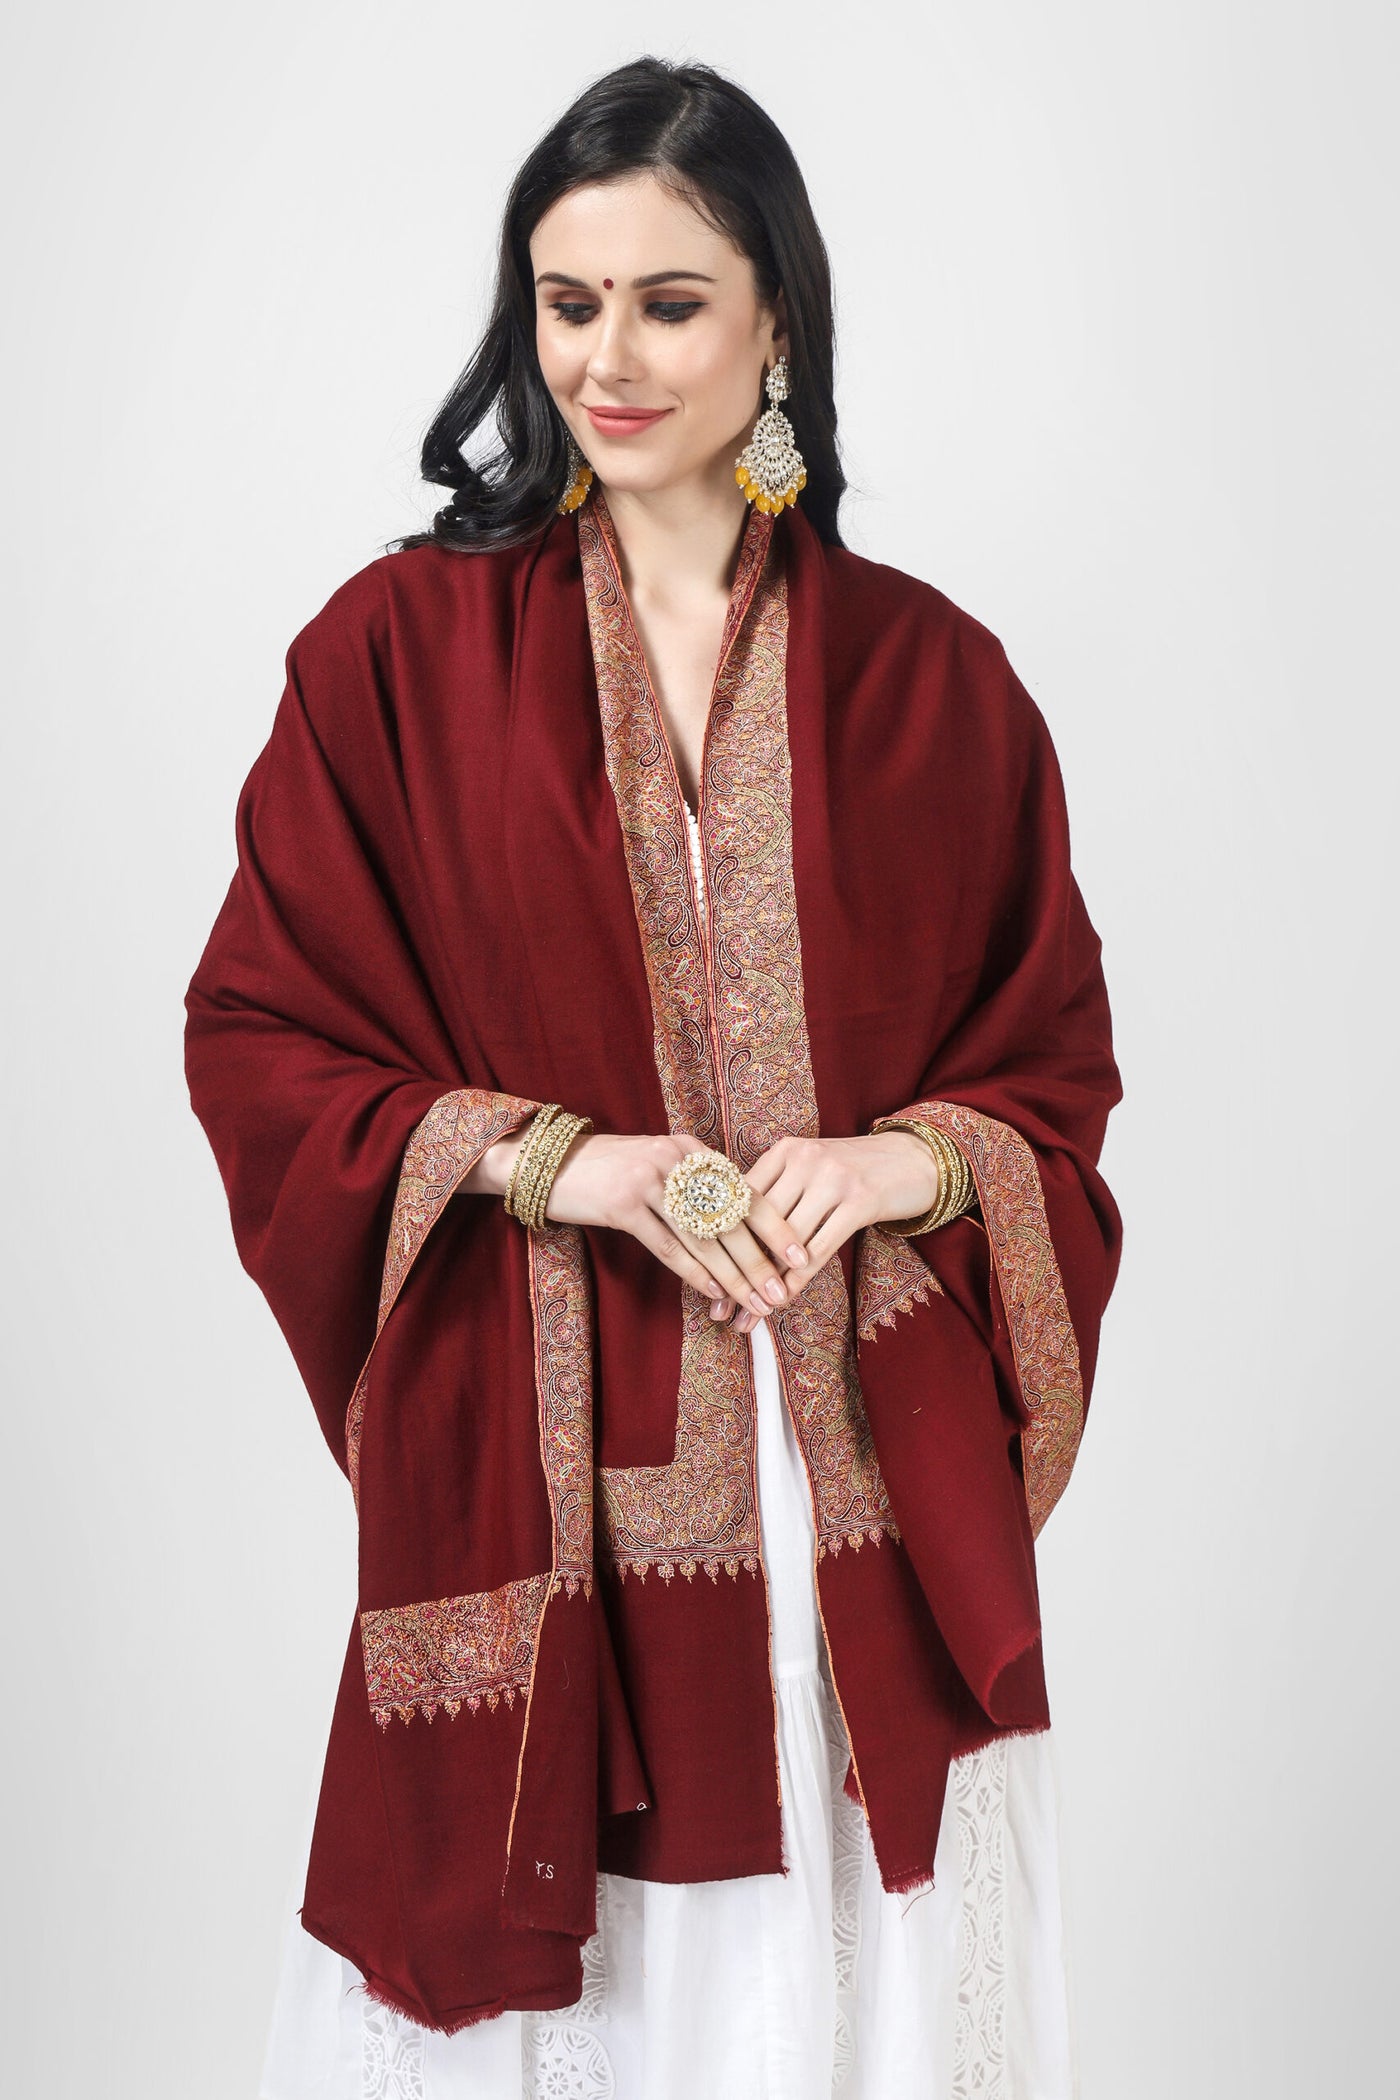 Maroon mehraab Pashmina border sozni shawl expertly crafted from the finest pashmina material and featuring intricate embroidery . Perfect for any occasion, our shawls offer unmatched warmth, comfort, and style. Treat yourself or your loved ones to the ultimate indulgence with our authentic and handwoven shawls.